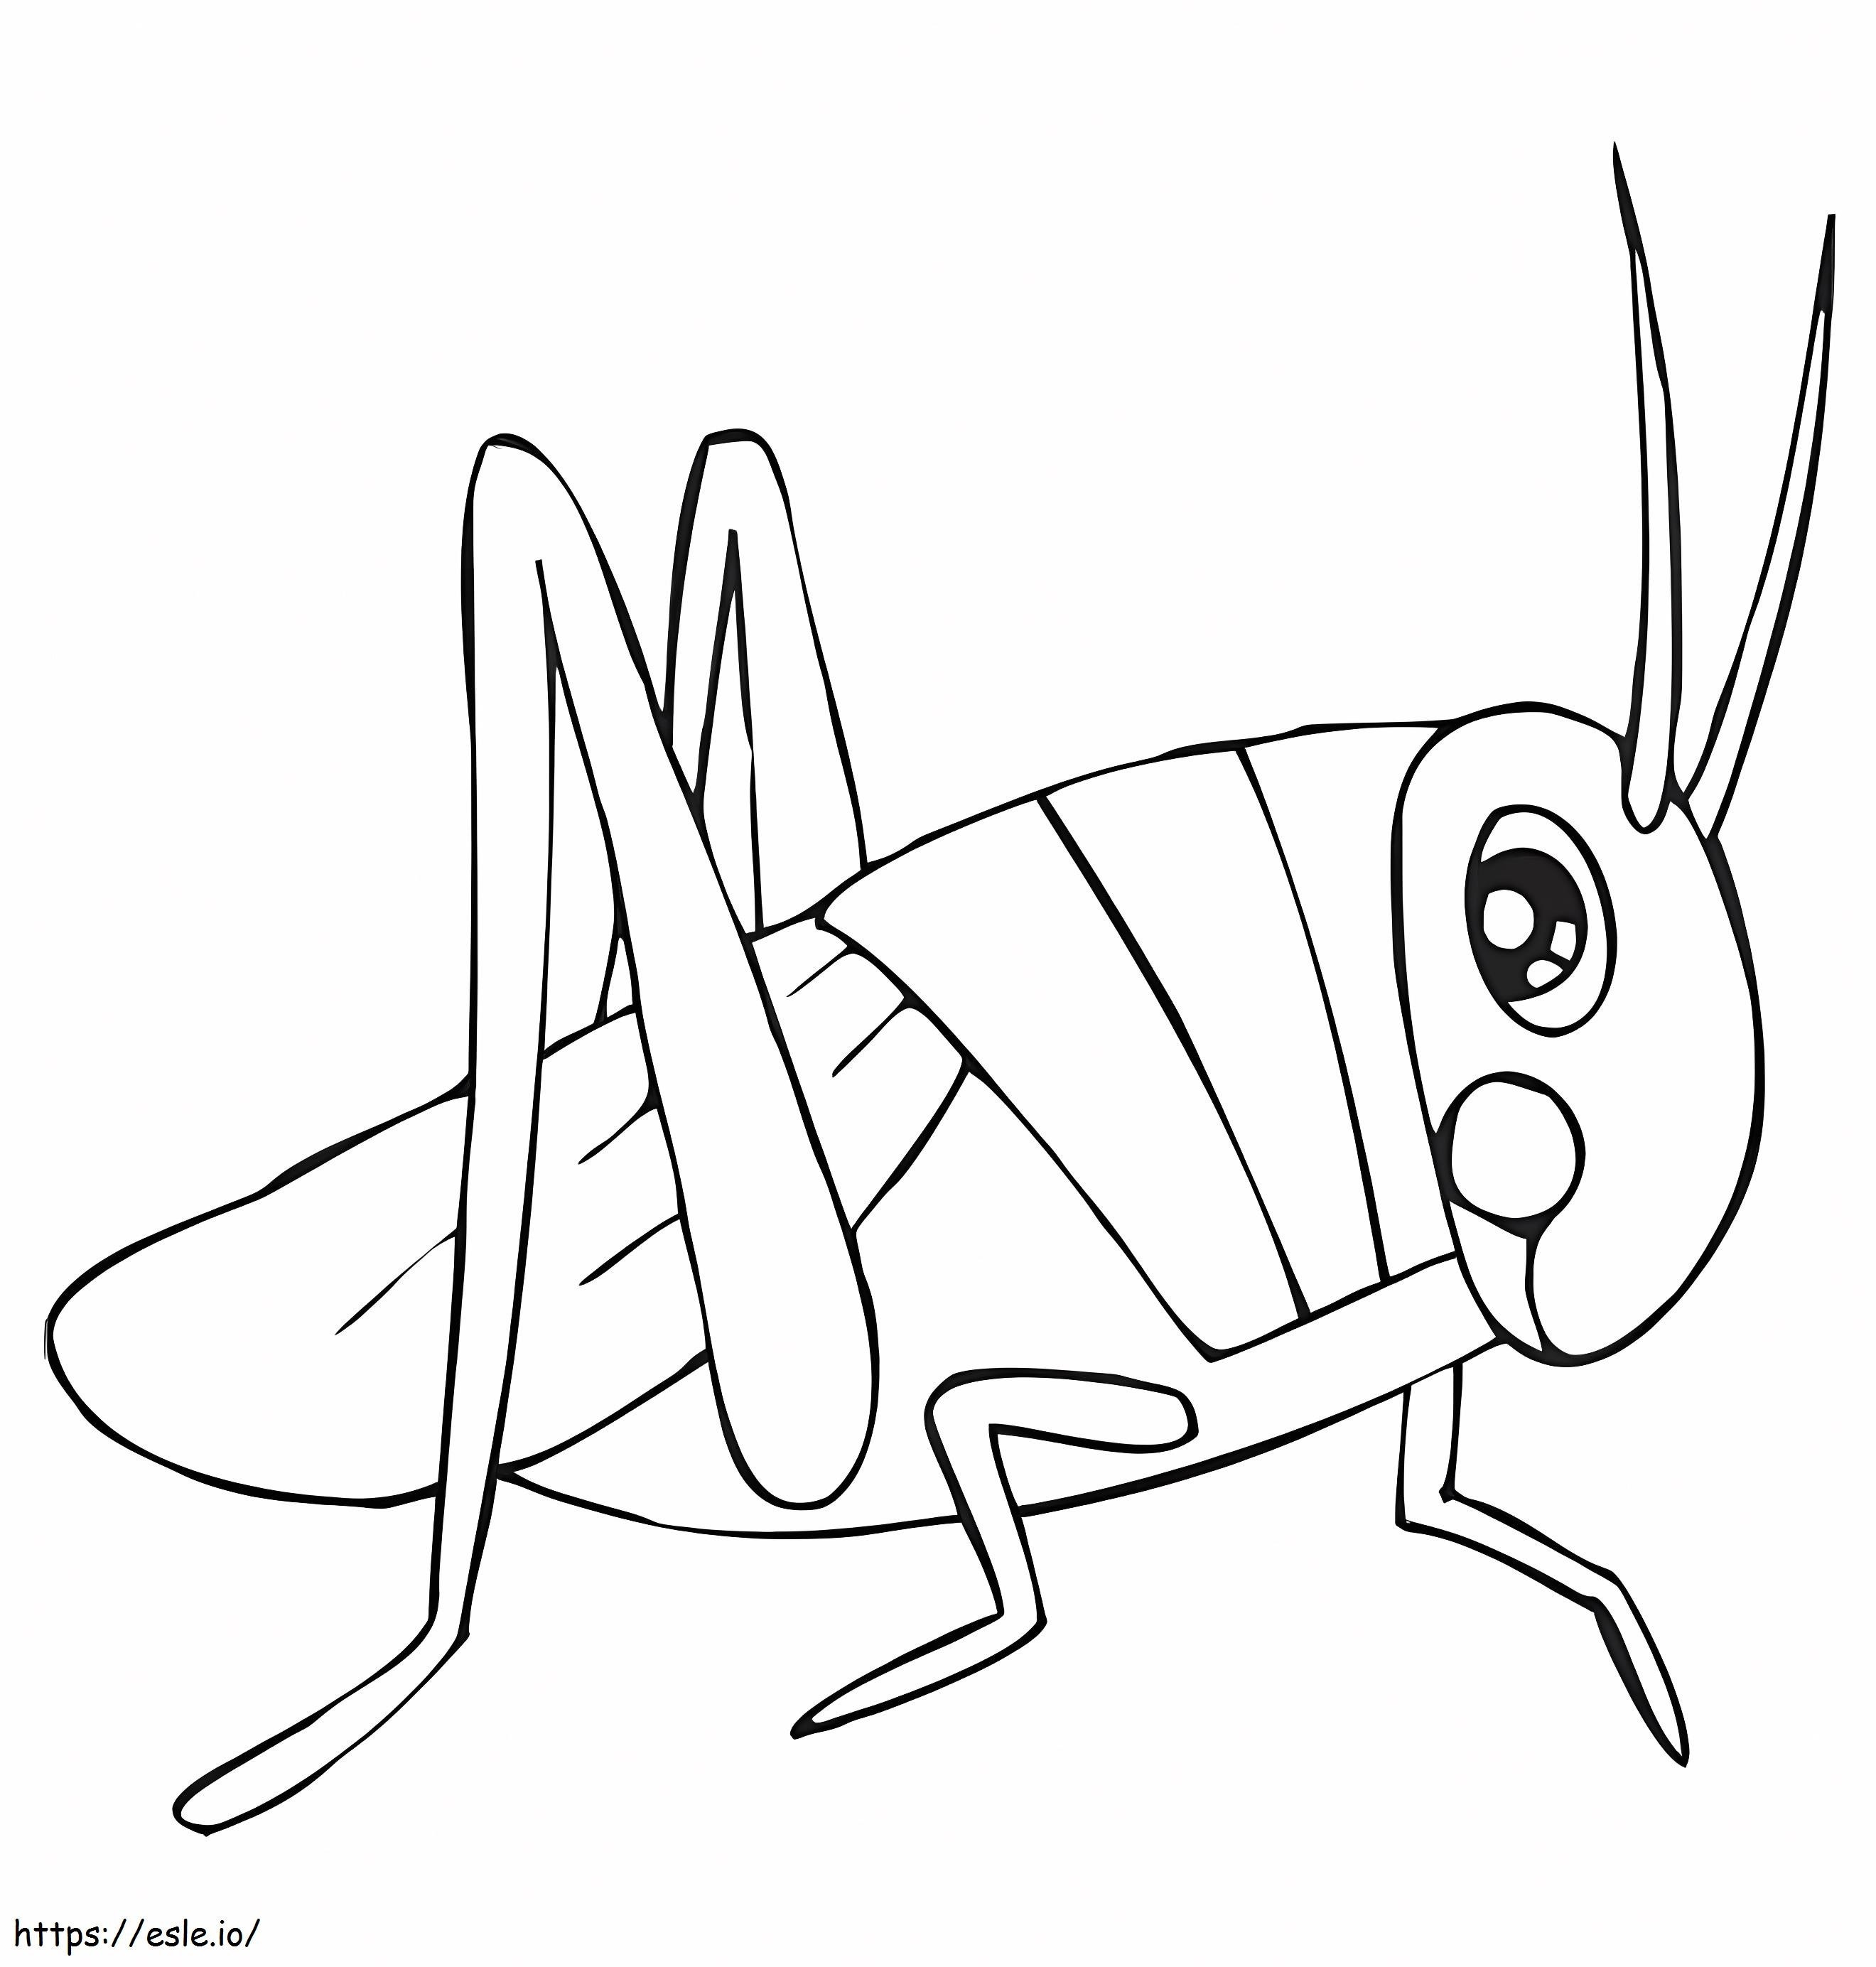 Basic Grasshopper coloring page